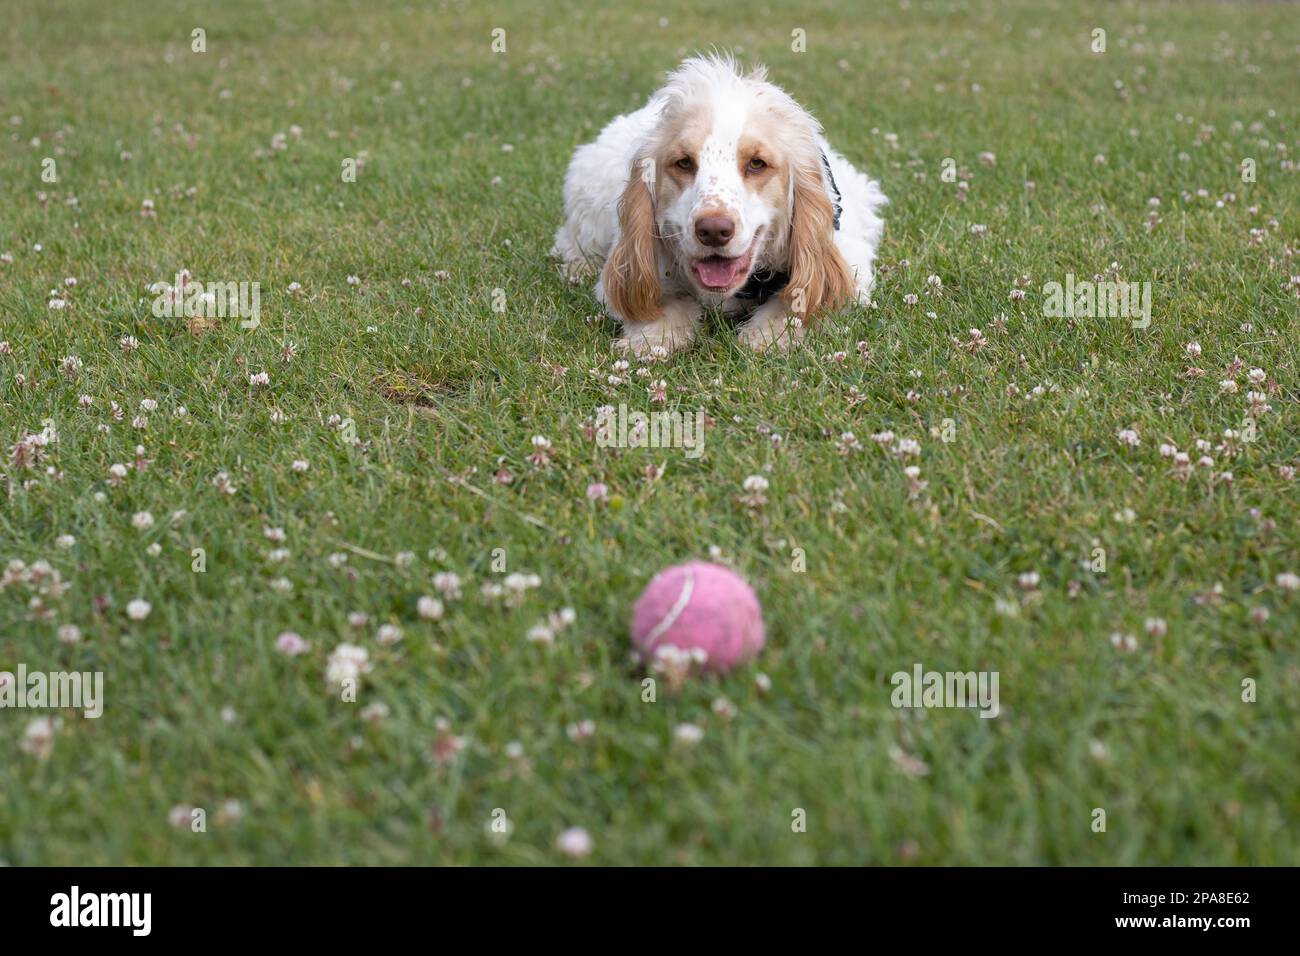 Spaniel intently watching a ball waiting for a command Stock Photo